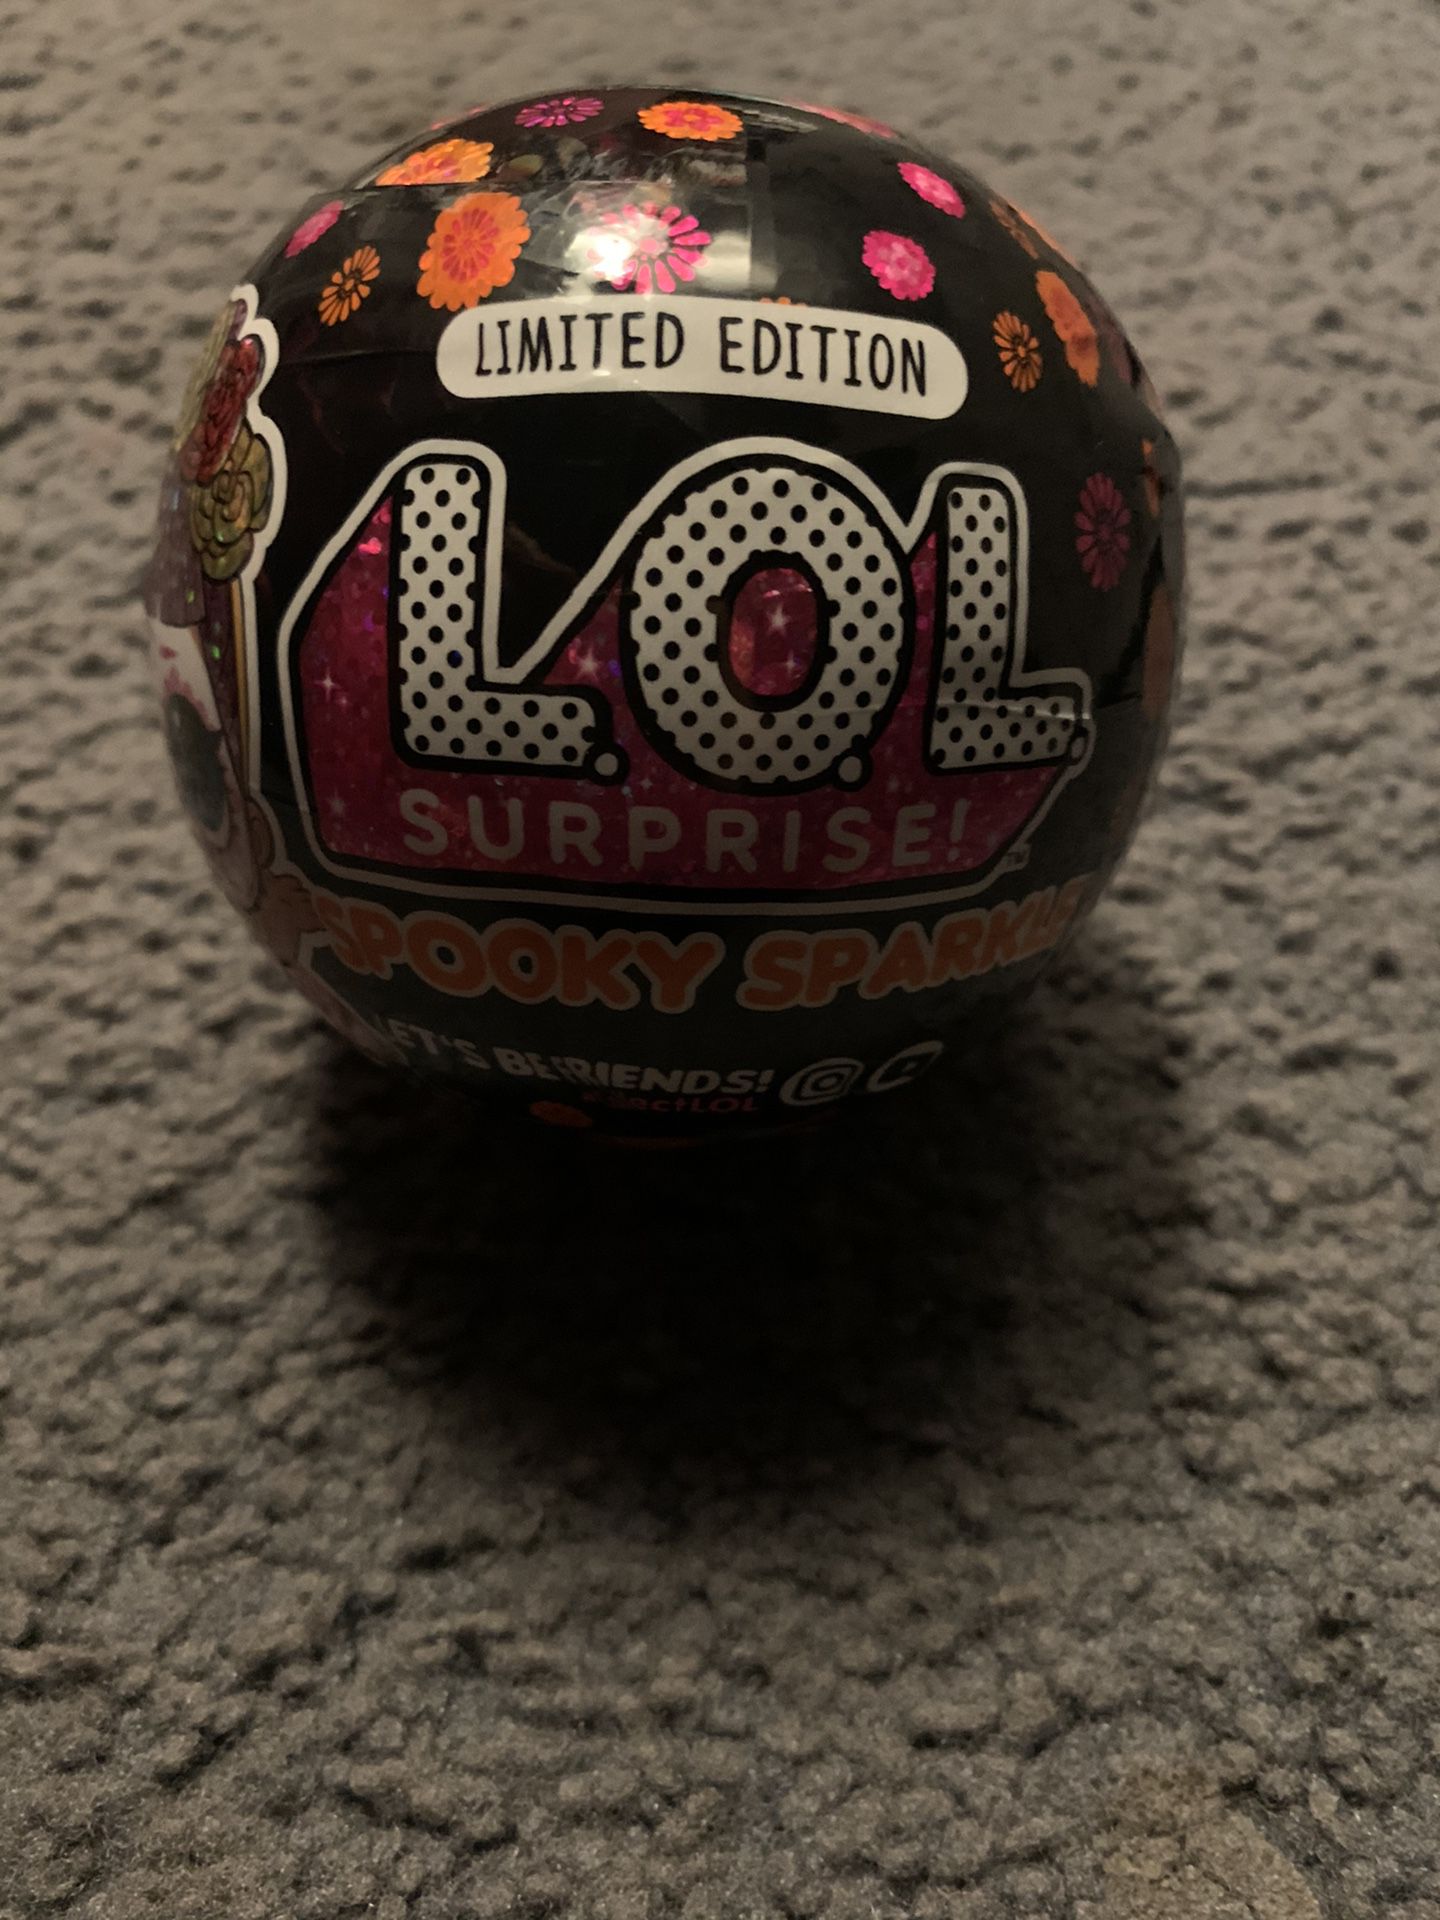 LOL surprise “Limited Edition”